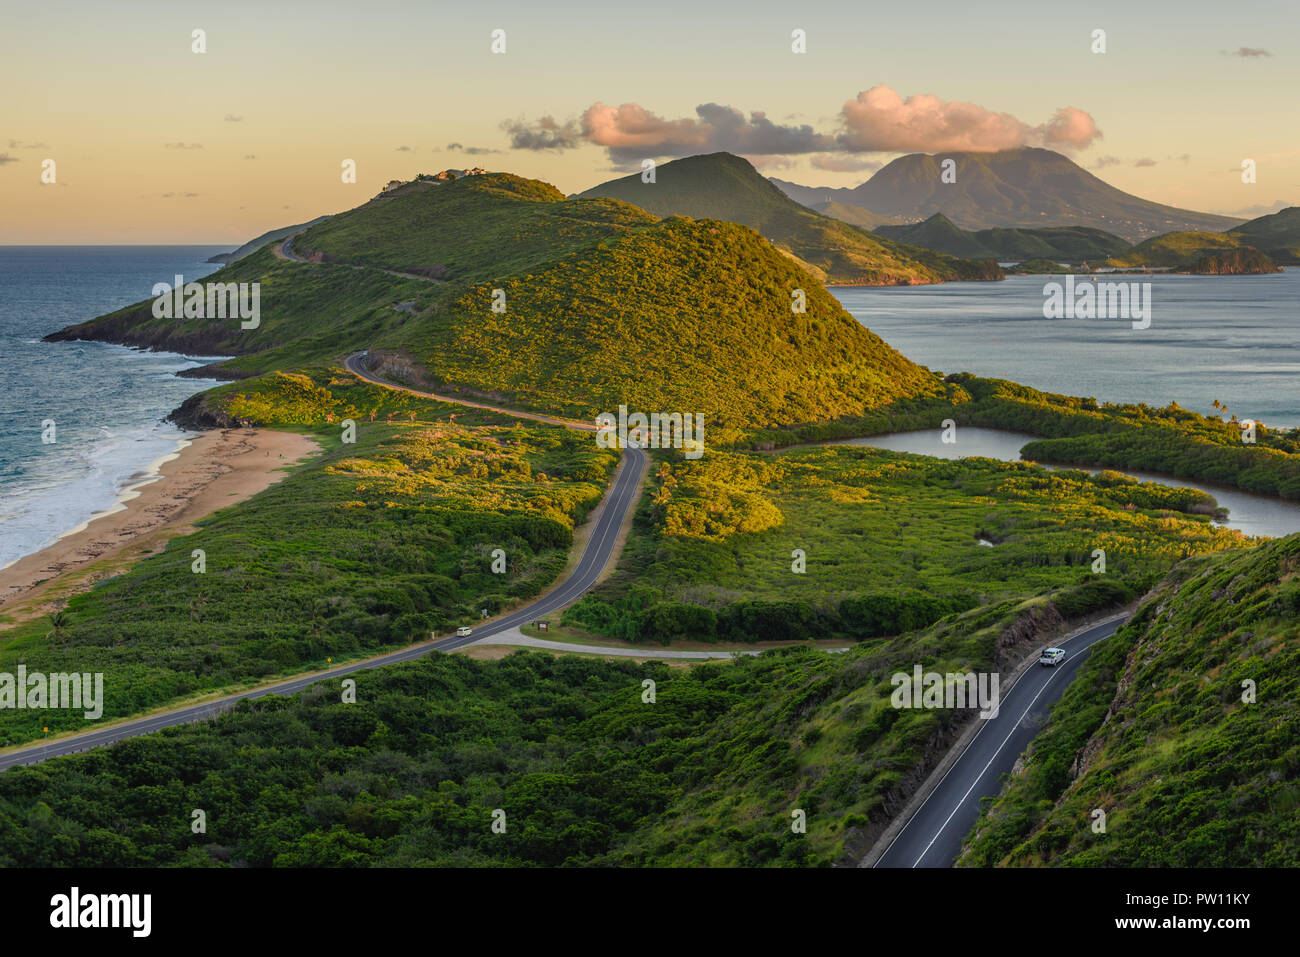 Saint Kitts mountains and beach viewpoint, view of the roads to the south of the caribbean island during sunset. Blue ocean and green lush mountains i Stock Photo